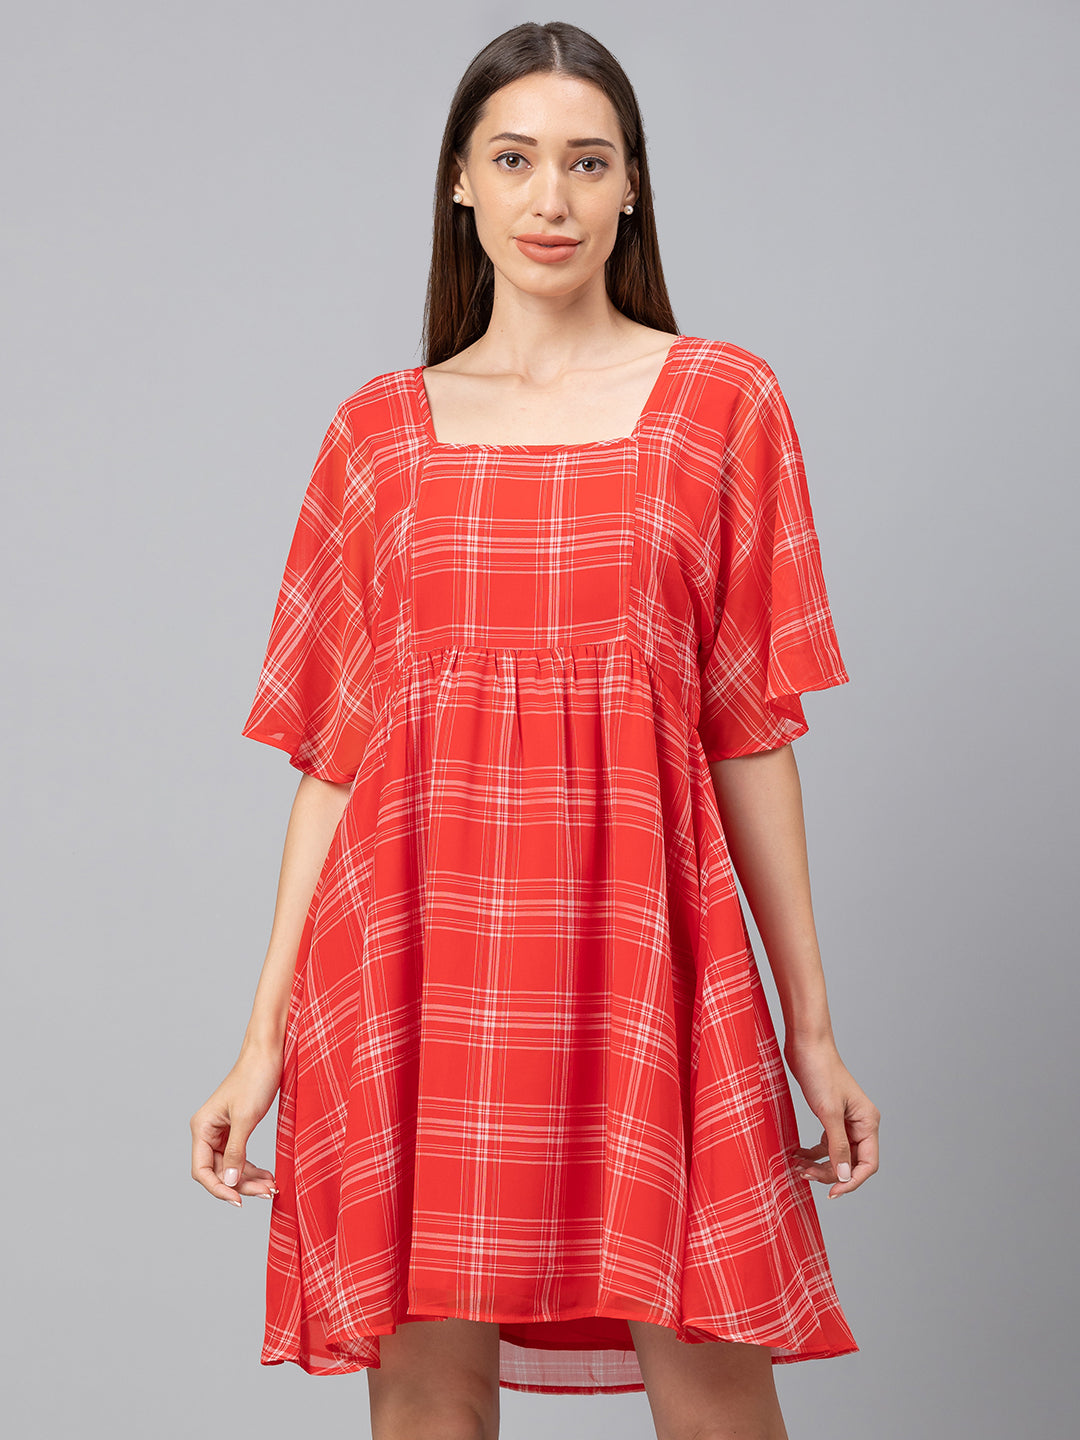 Globus Red Checked Dress